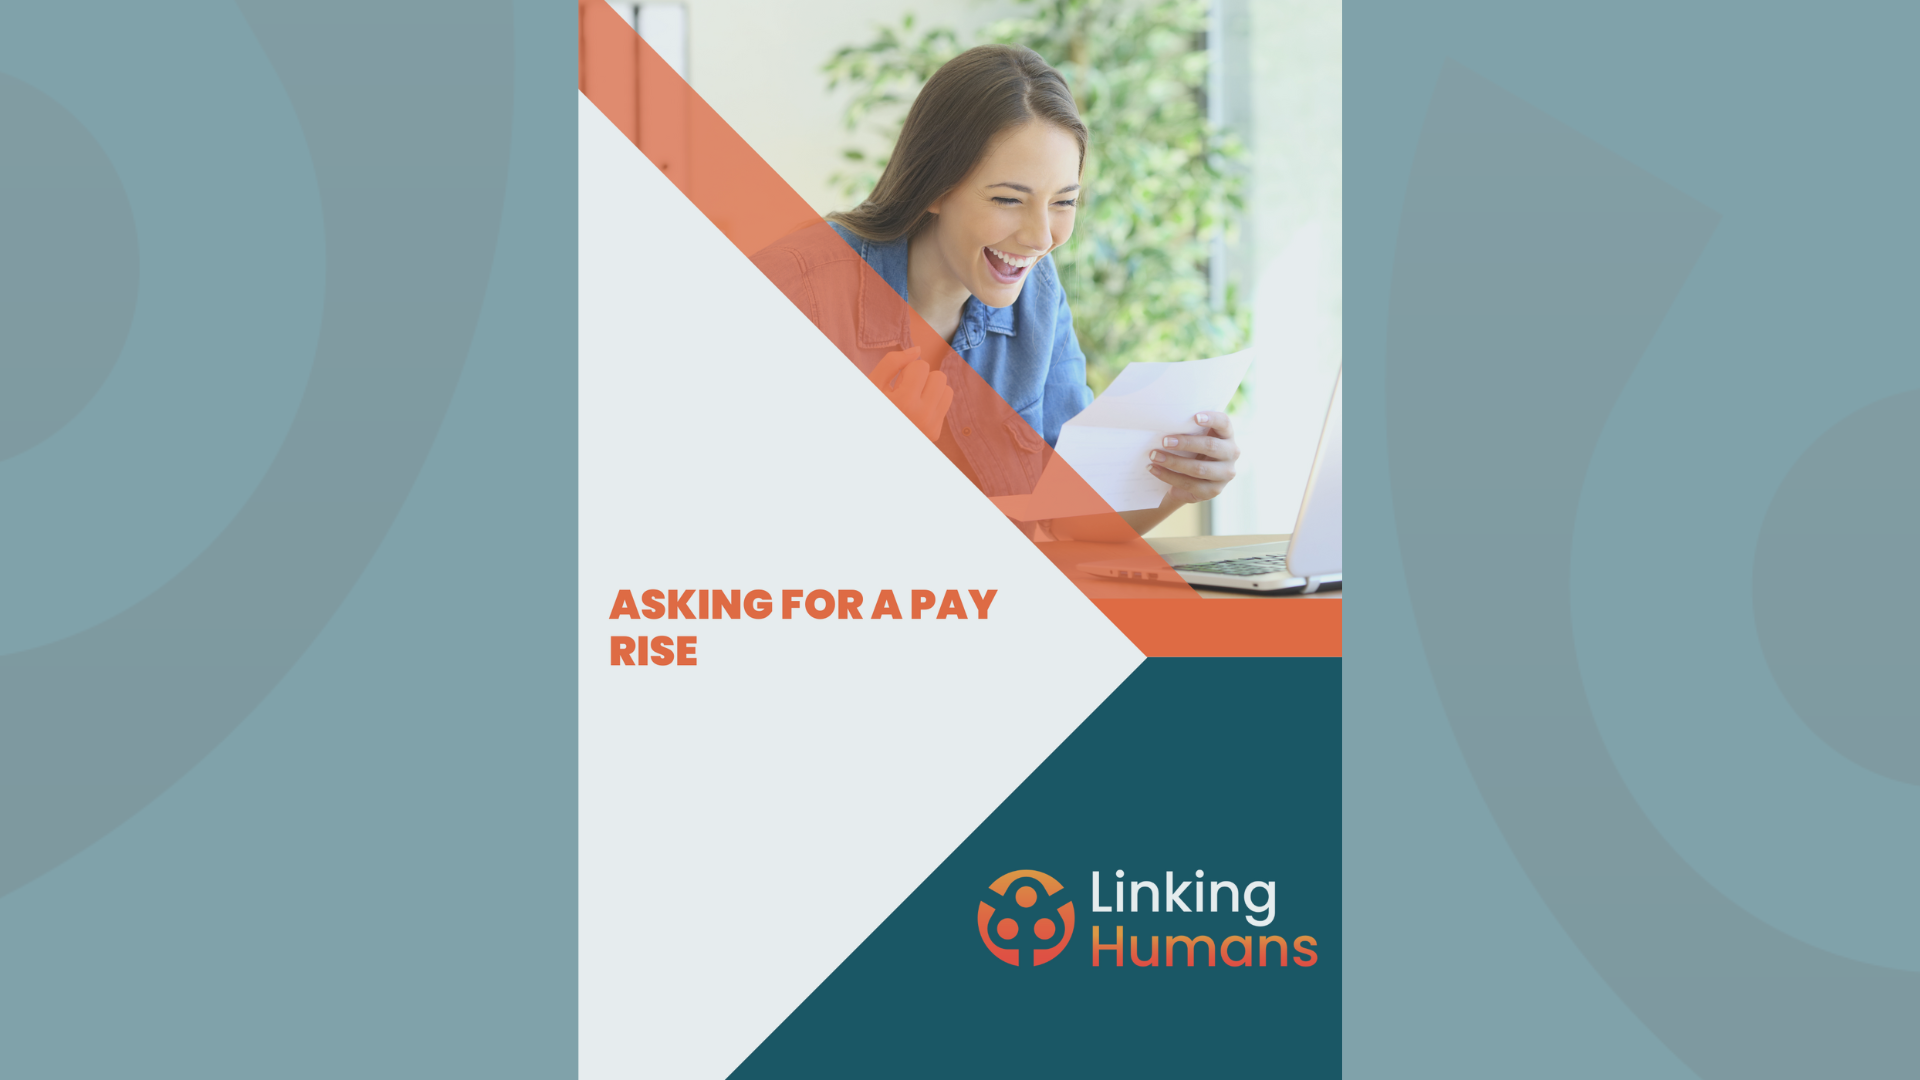 How to Ask For a Payrise report